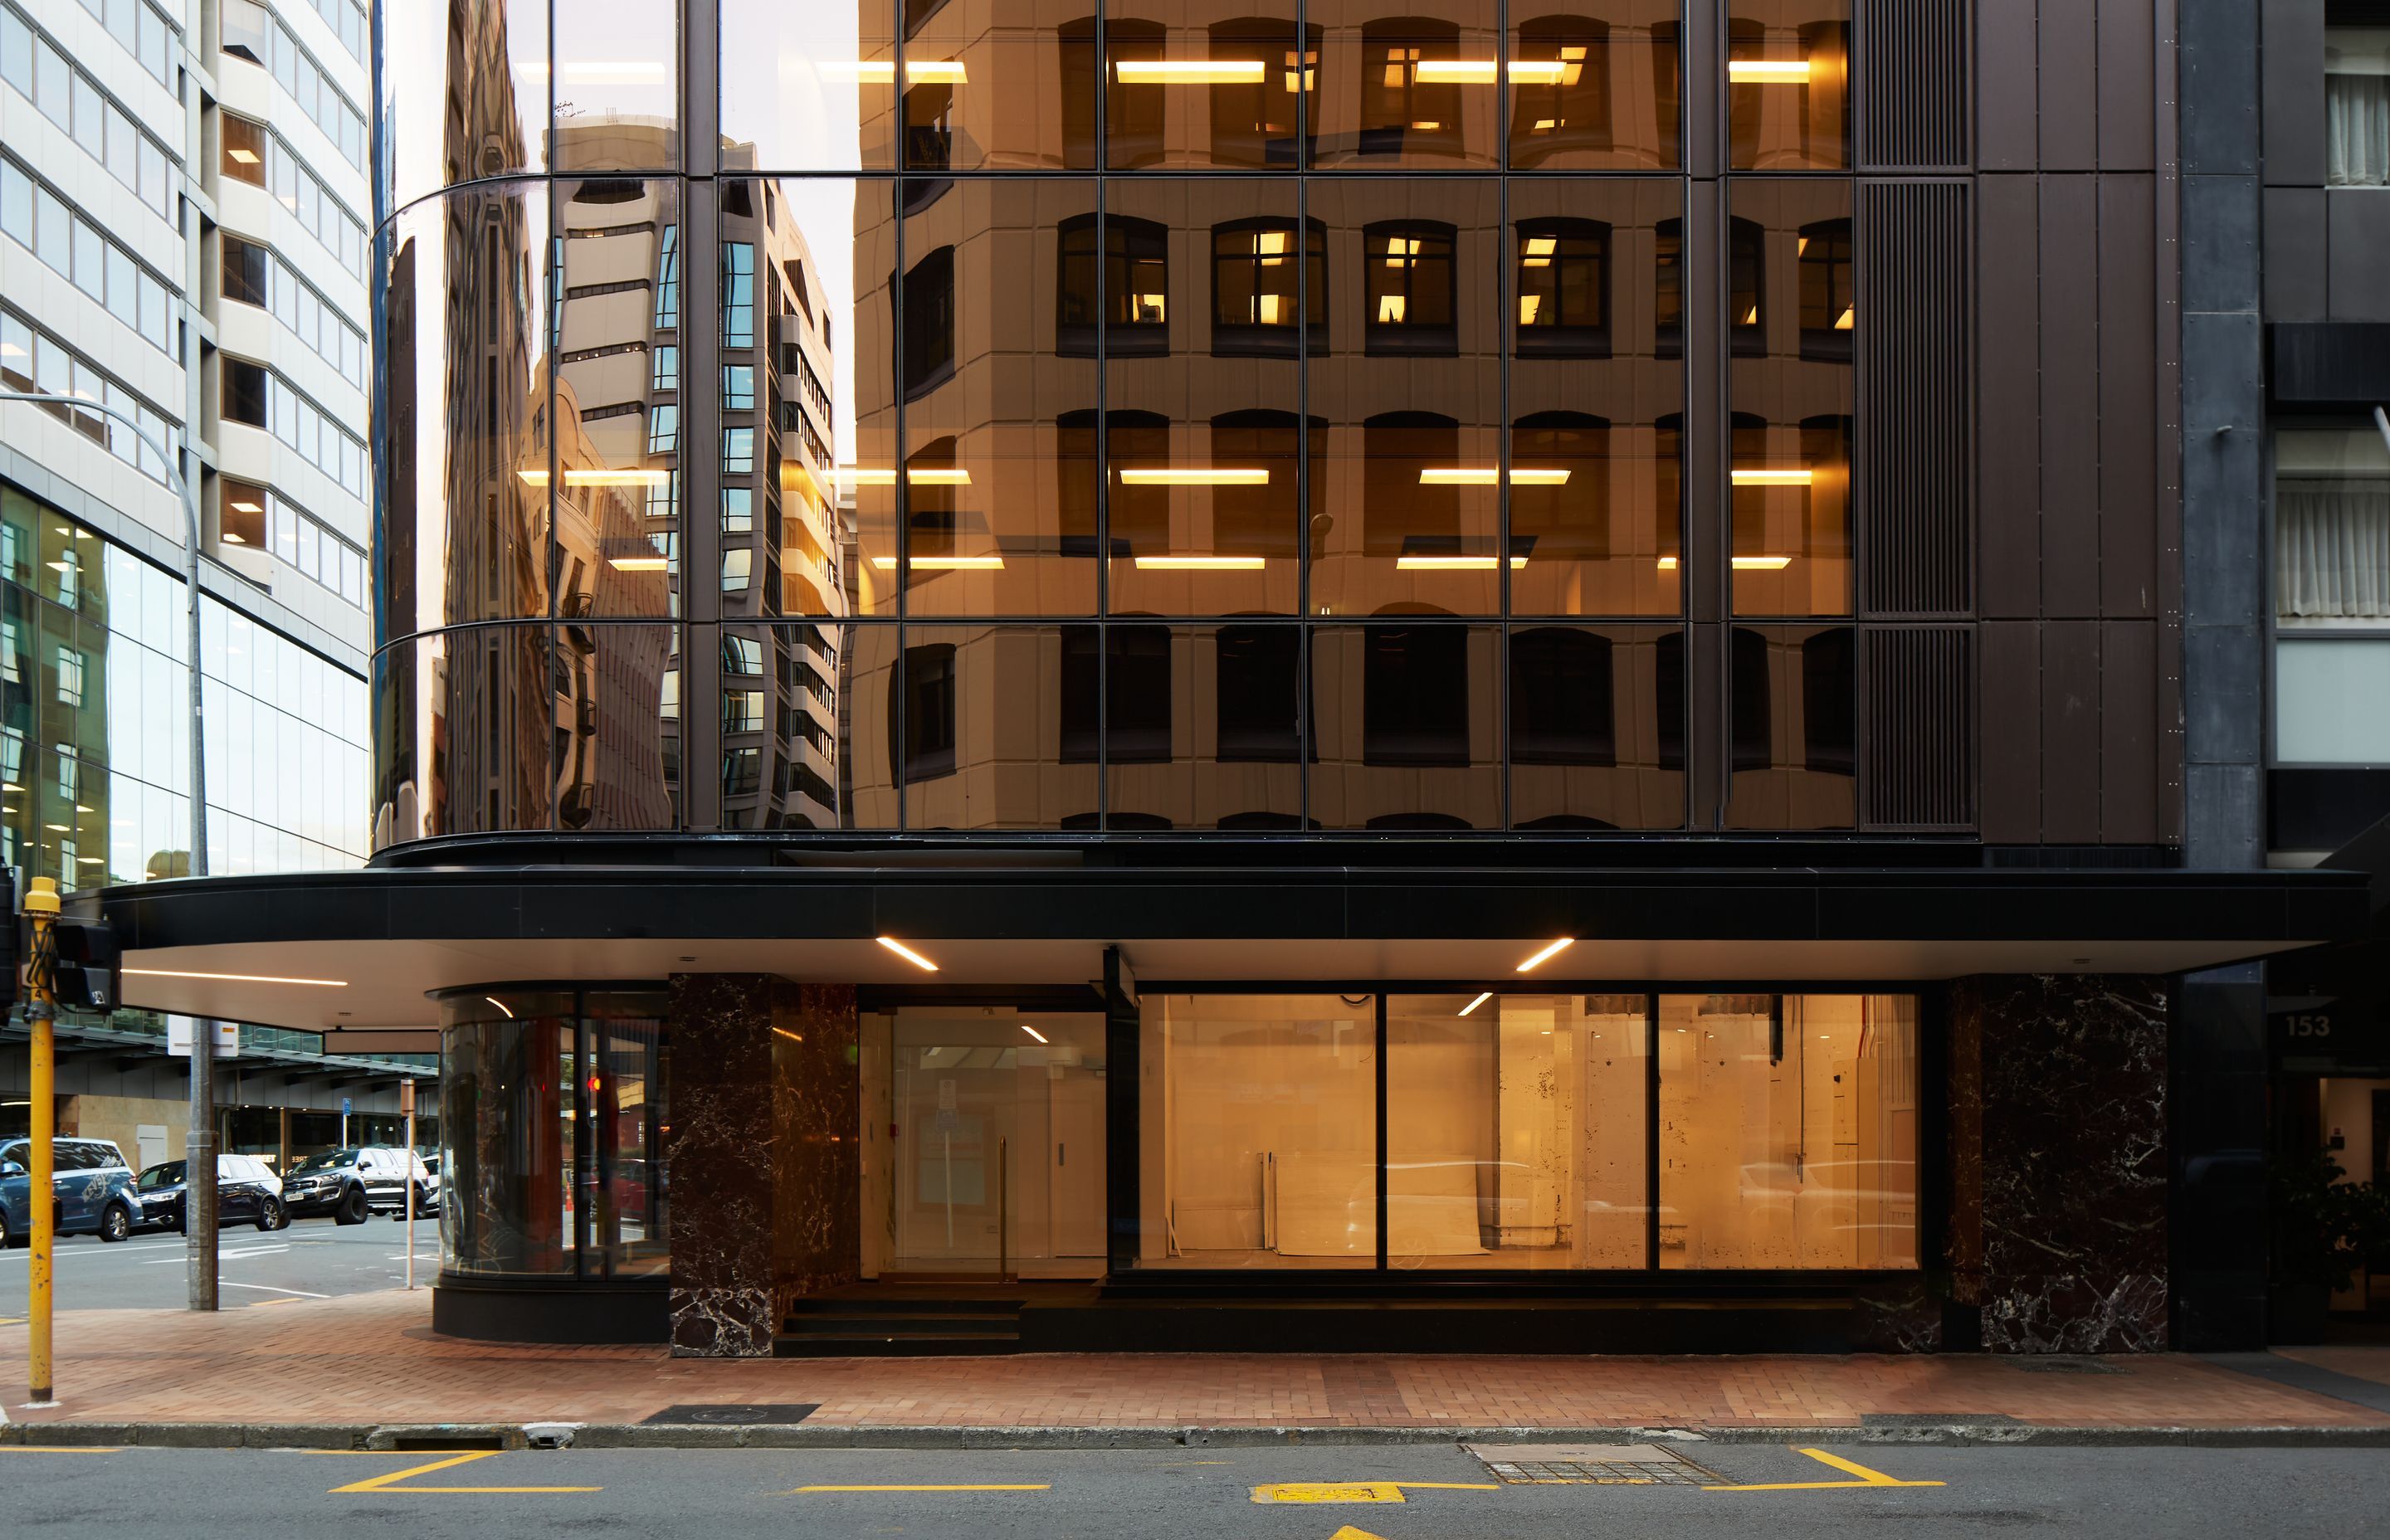 The ground floor of the building includes infrastructure for retail or hospitality. “There is a small area for retail on the corner, which is one structural bay and the curve, and then that continues on. All of the Featherston Street frontage is retail.”